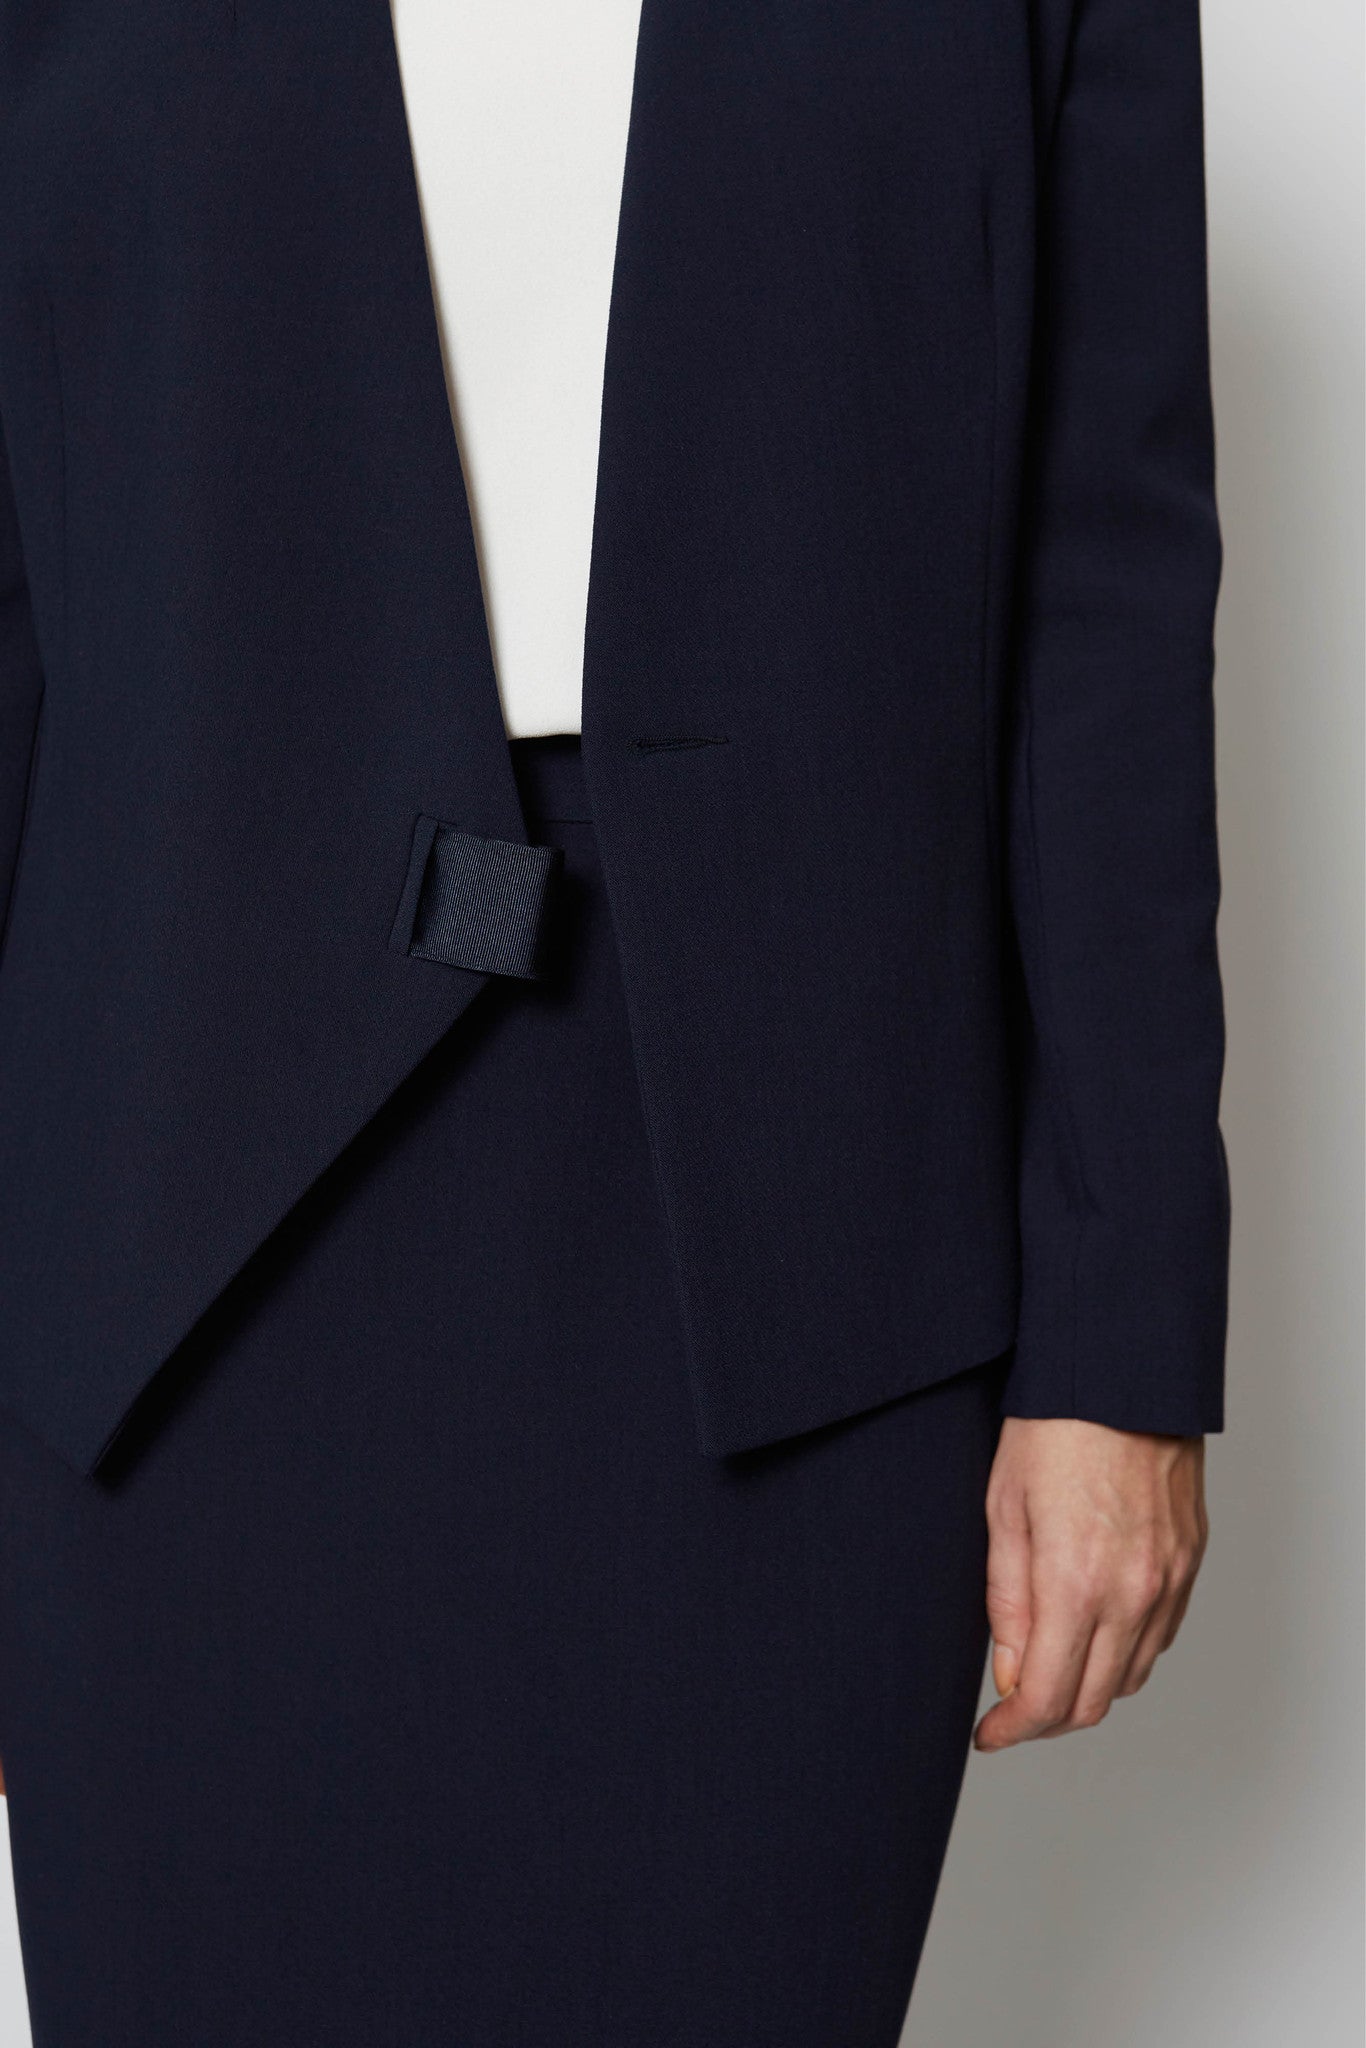 Winchester Navy Suiting Jacket - Libby London